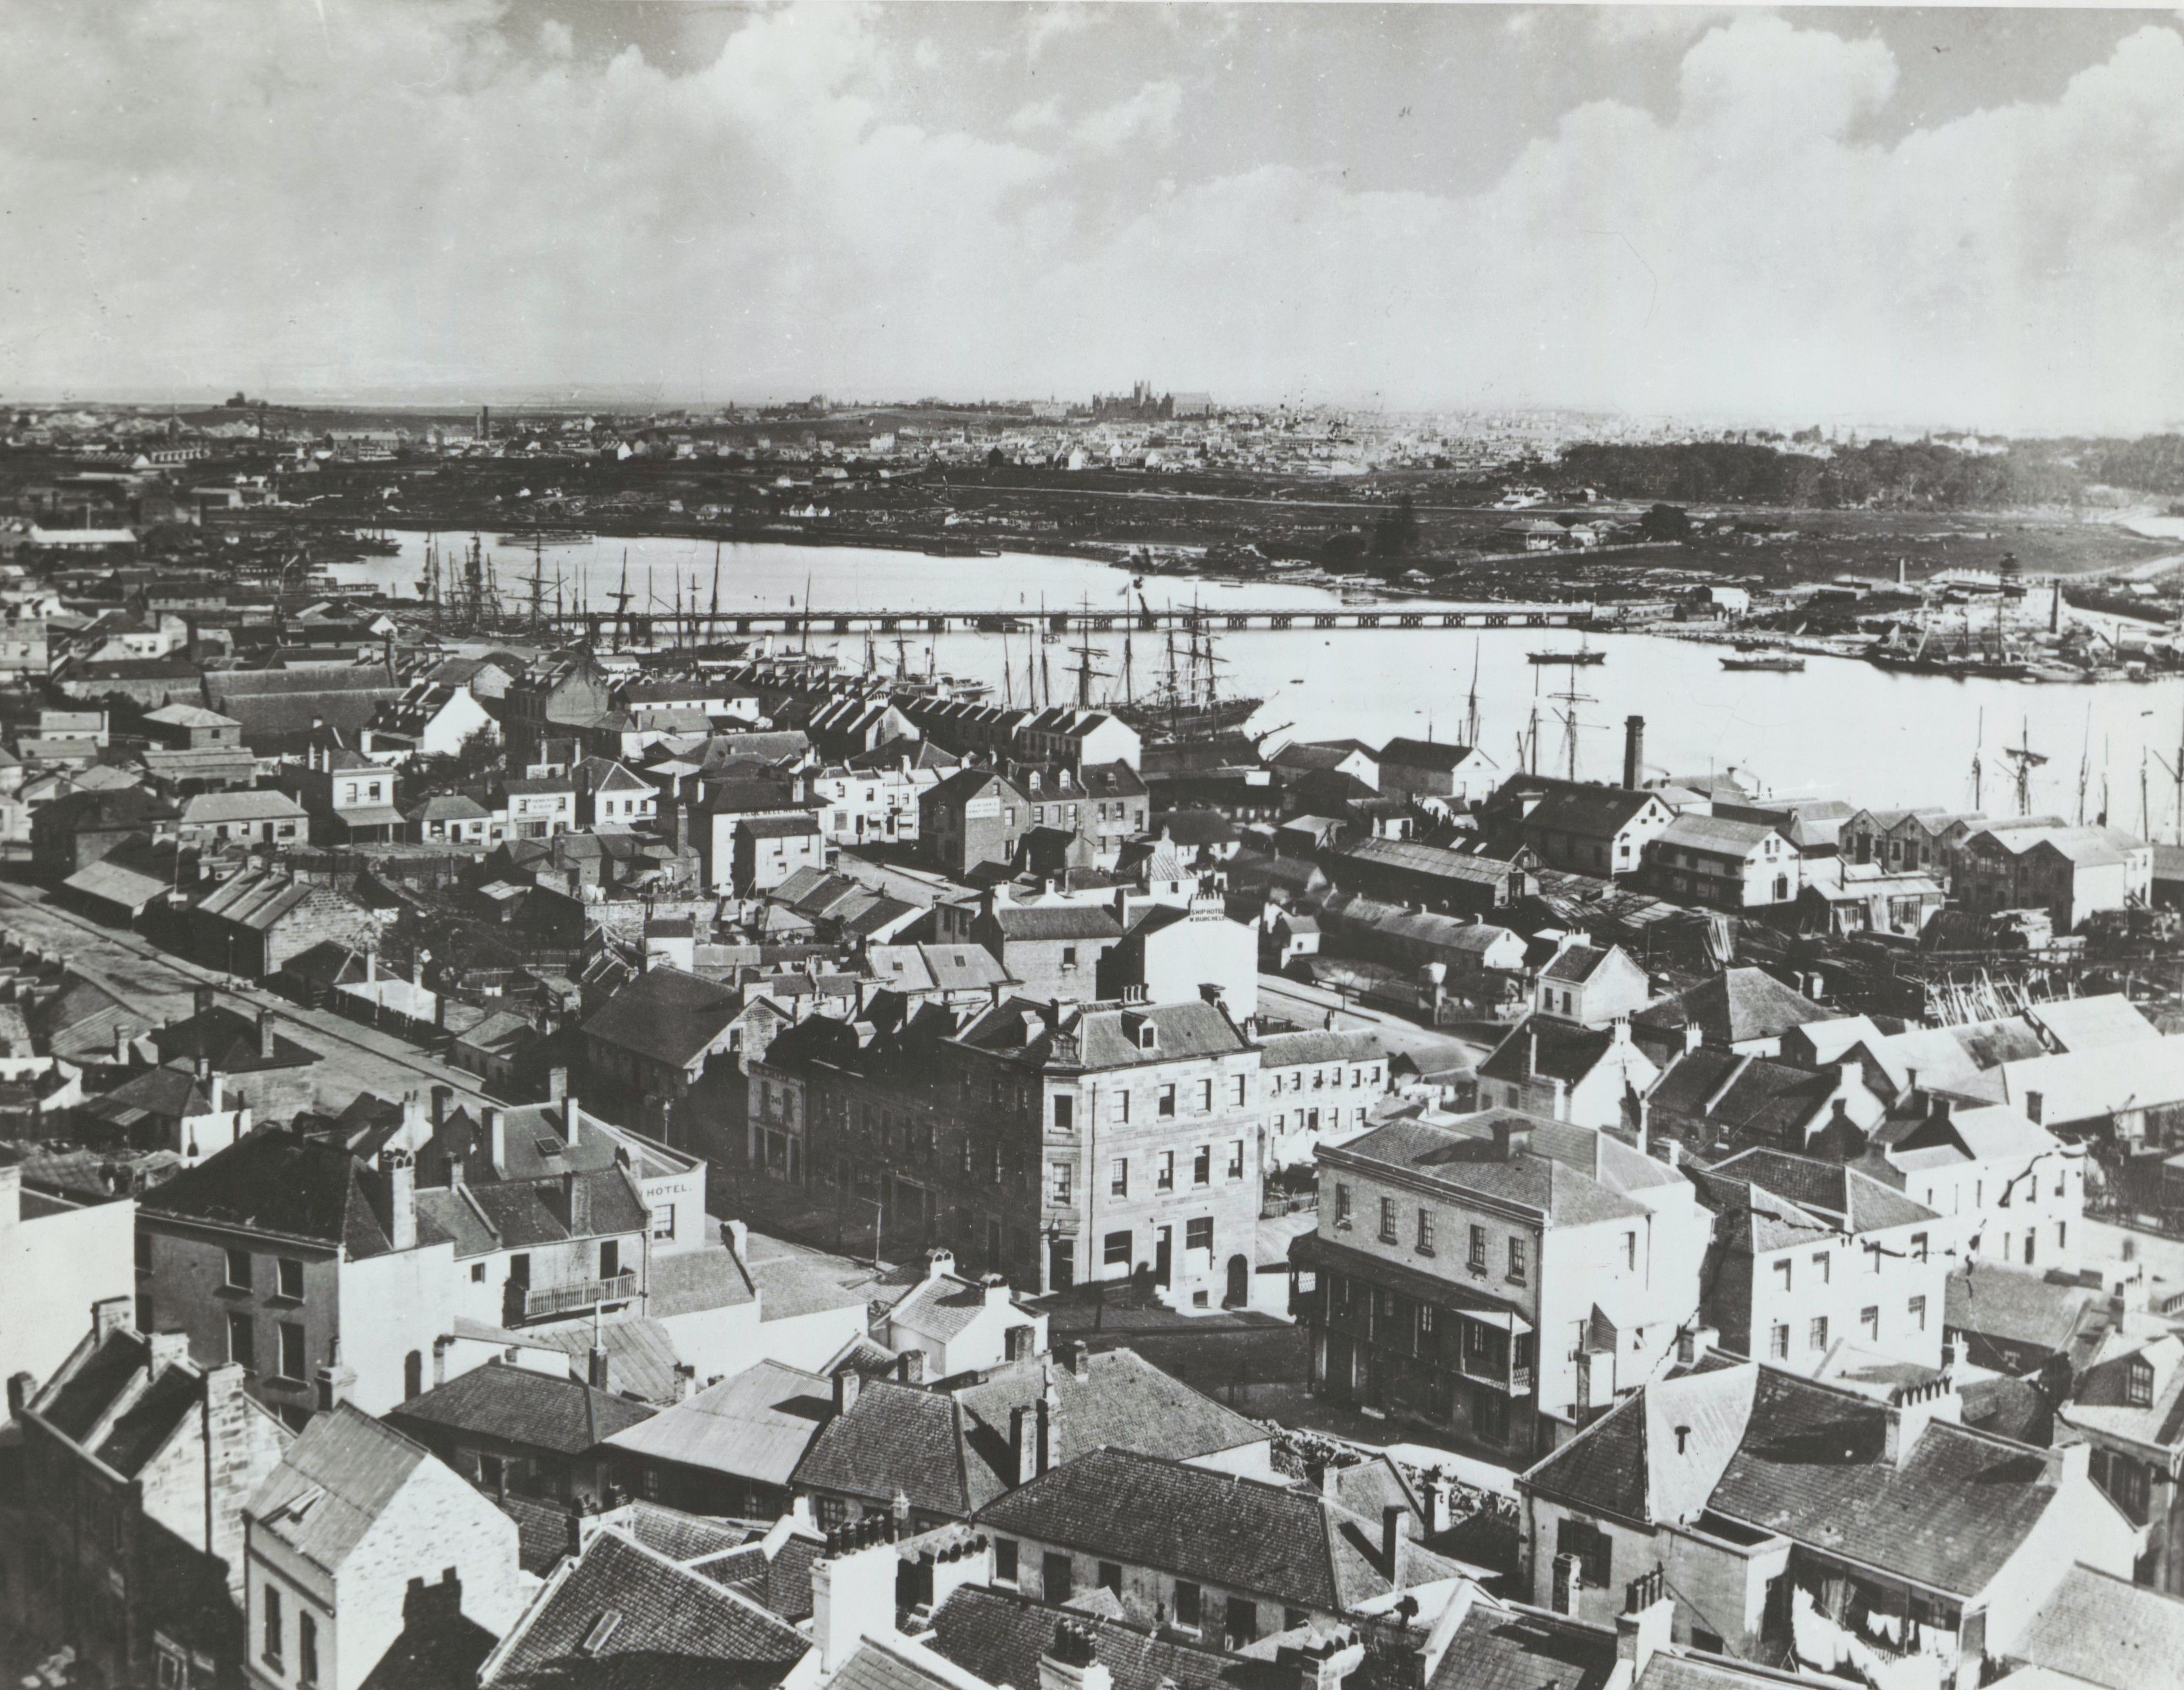 1870 view of Darling Harbour